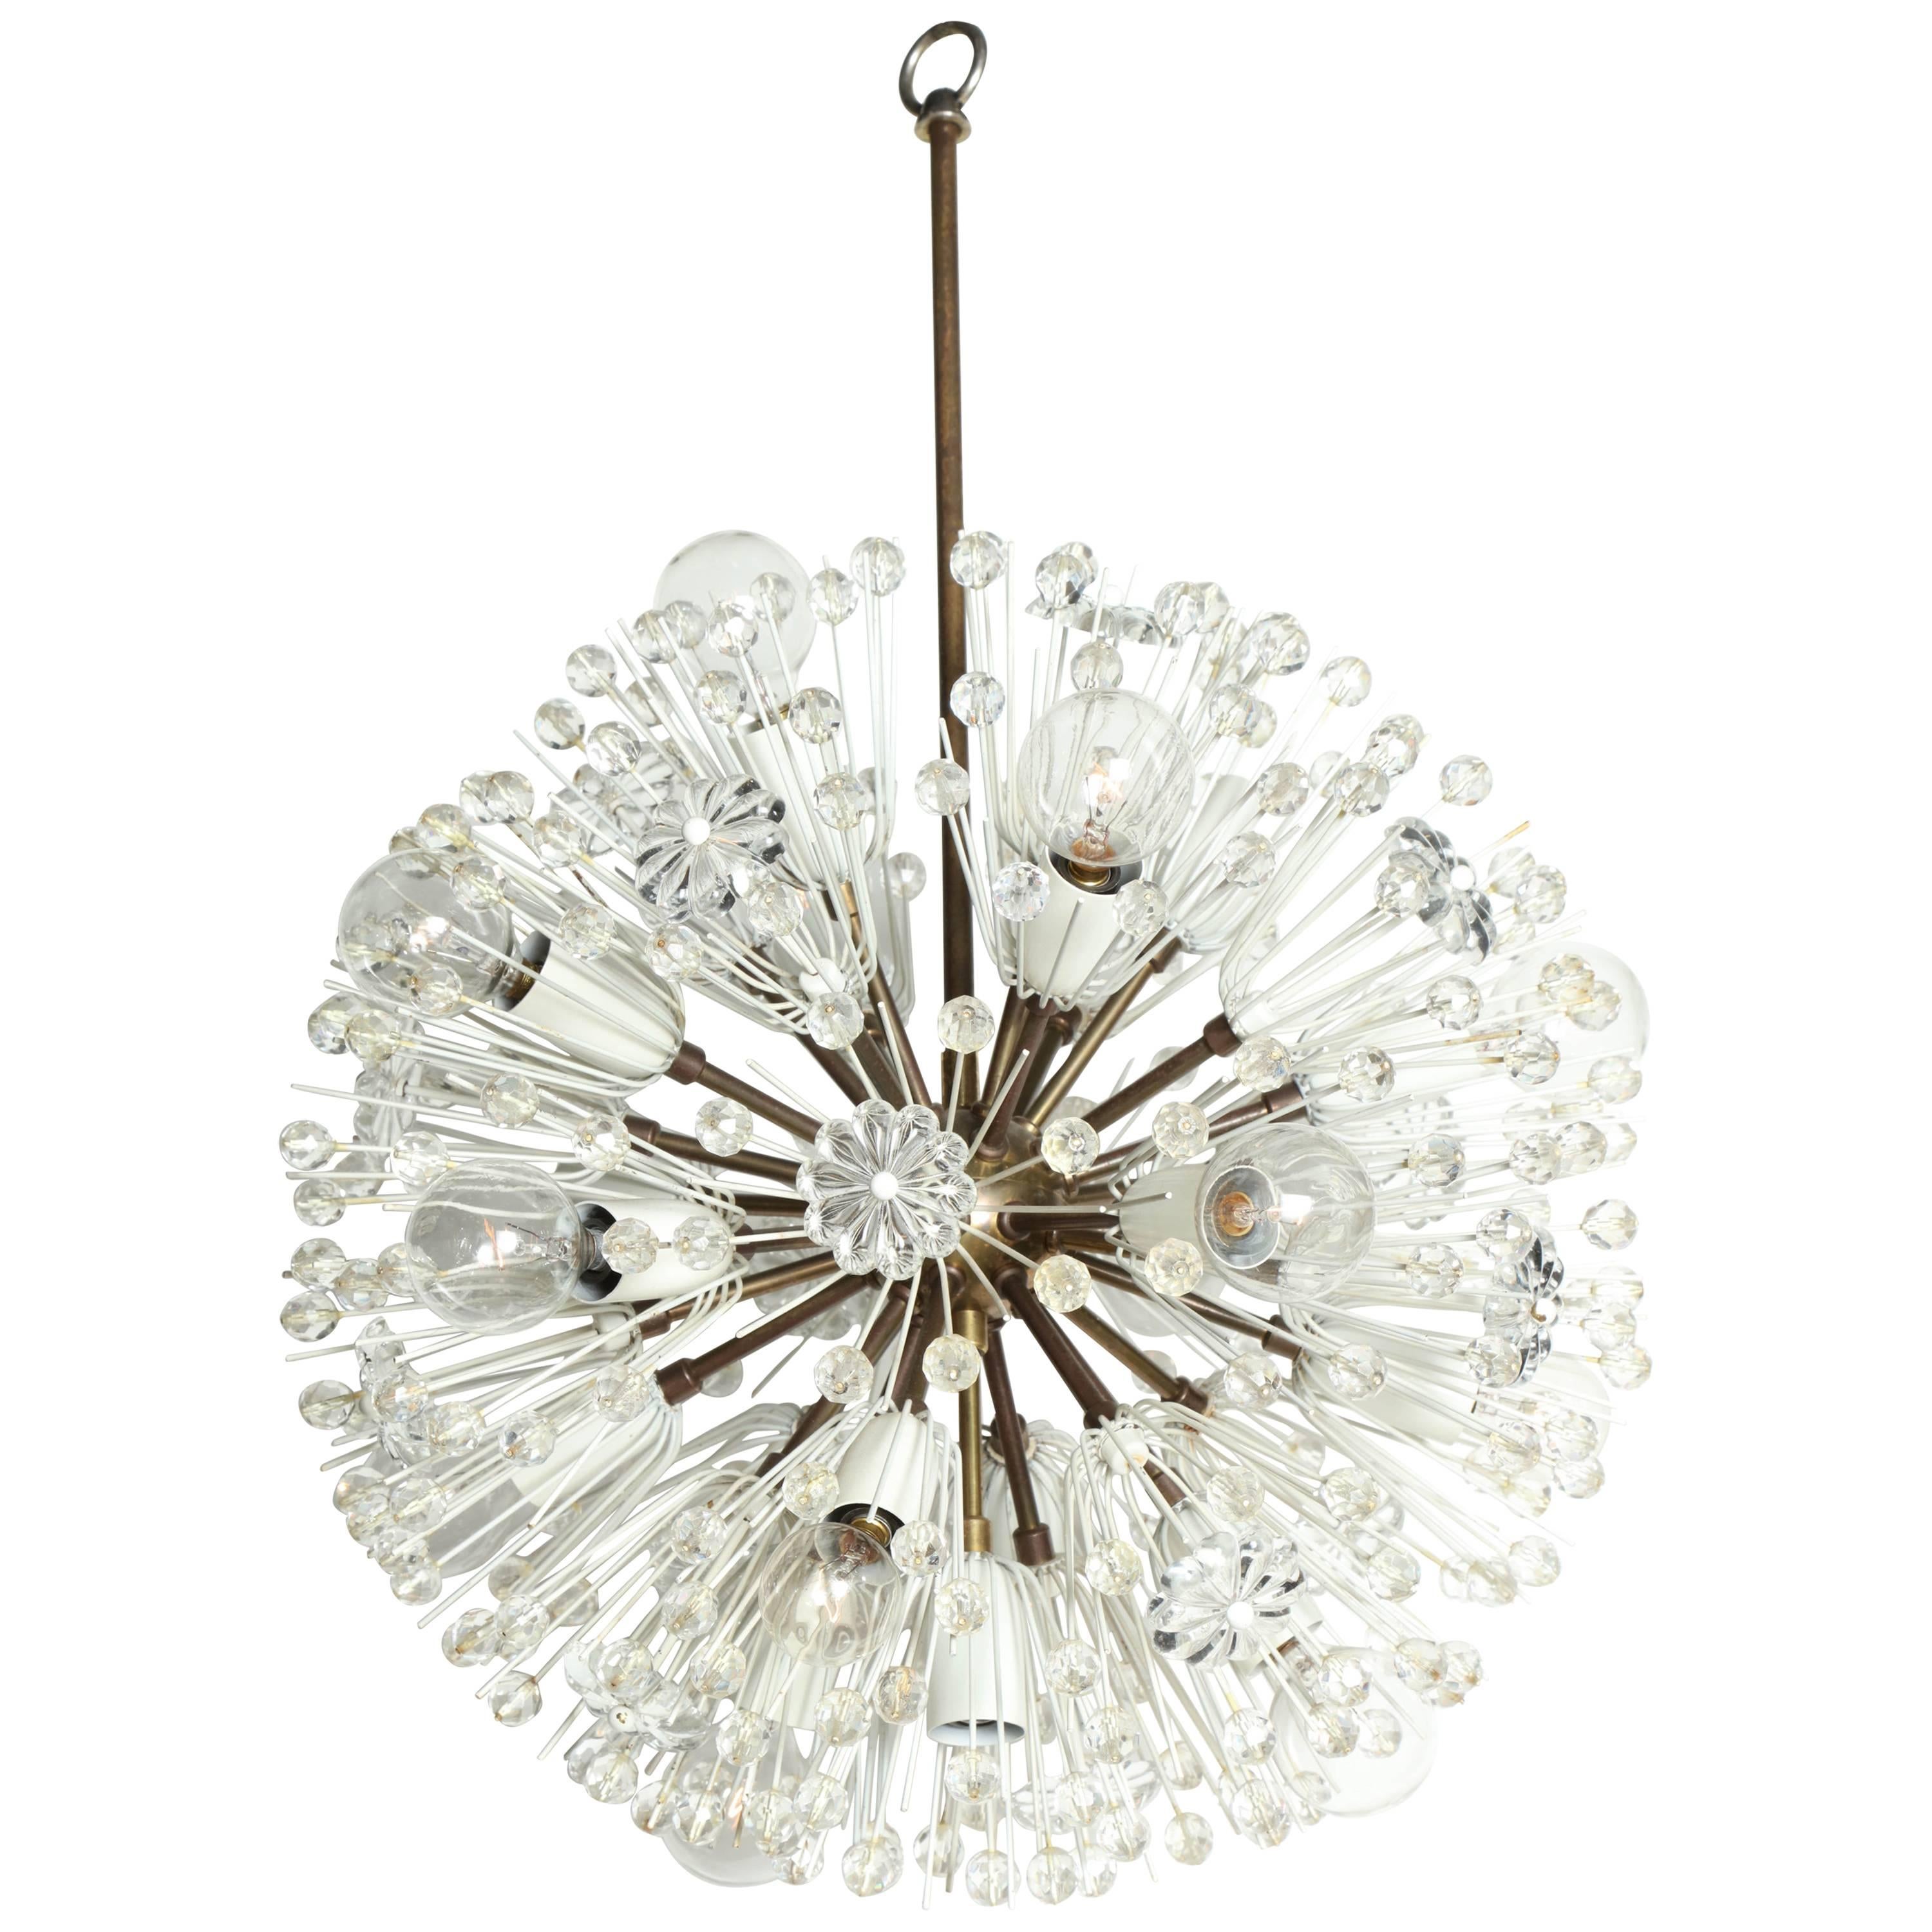 Emil Stejnar Brass and Clear Crystal "Snowball" Hanging Pendant, 1950's For Sale